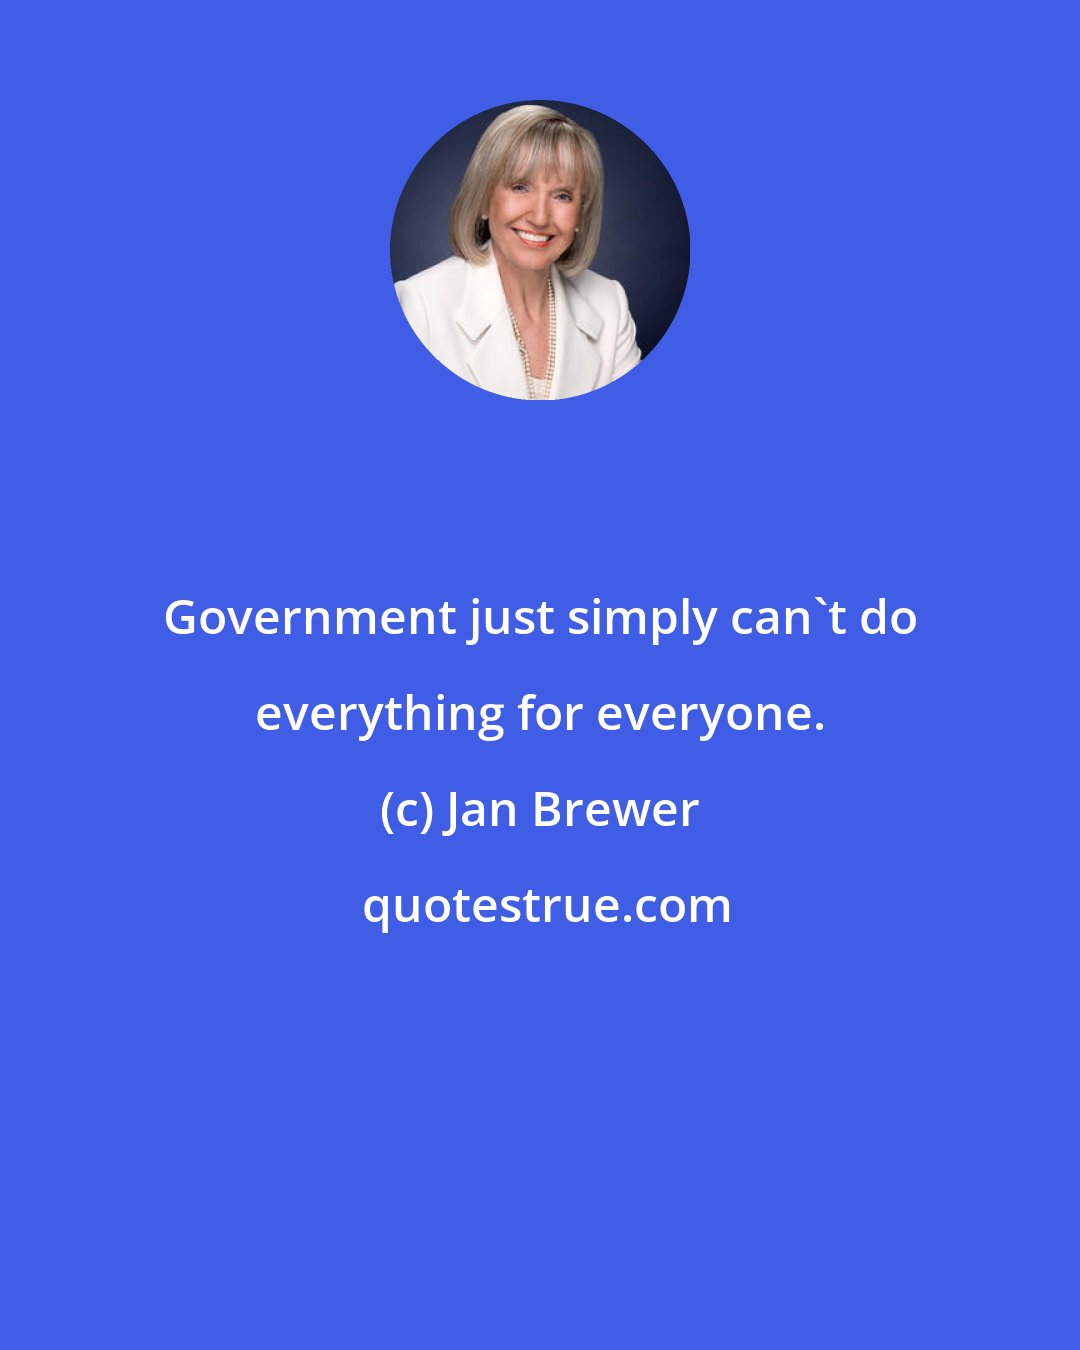 Jan Brewer: Government just simply can't do everything for everyone.